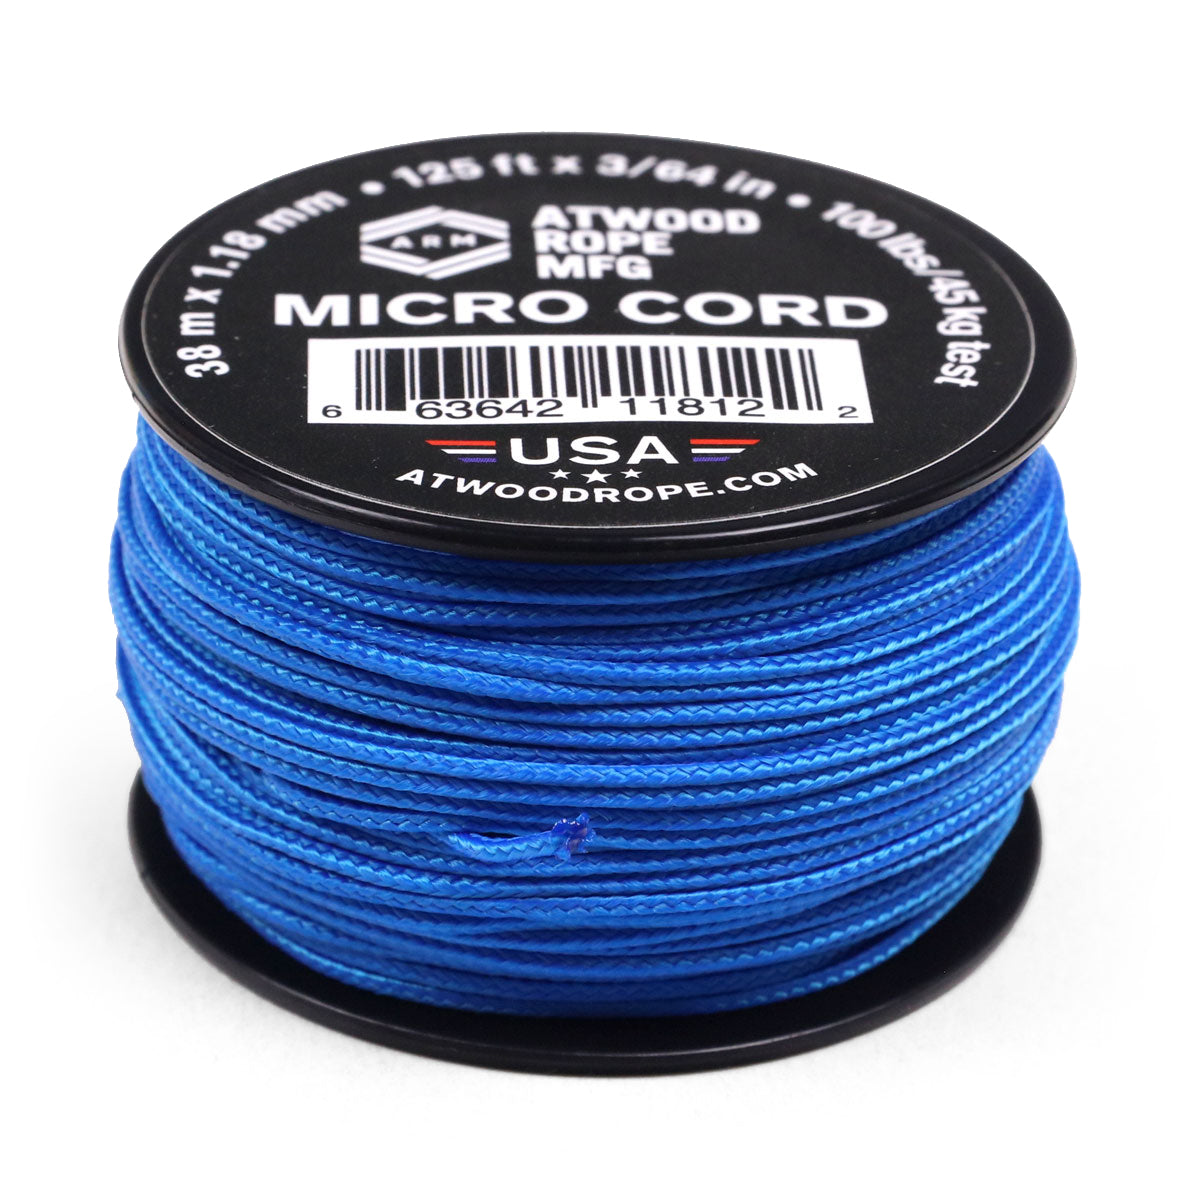  emma kites Blue 1mm UHMWPE Micro Cord Rope Whipping Twine  Durable Repair Cord Thread for Heavy Duty Canvas Tarps Bags Emergency Line  for Backpacking Survival 100Ft 350Lb : Tools & Home